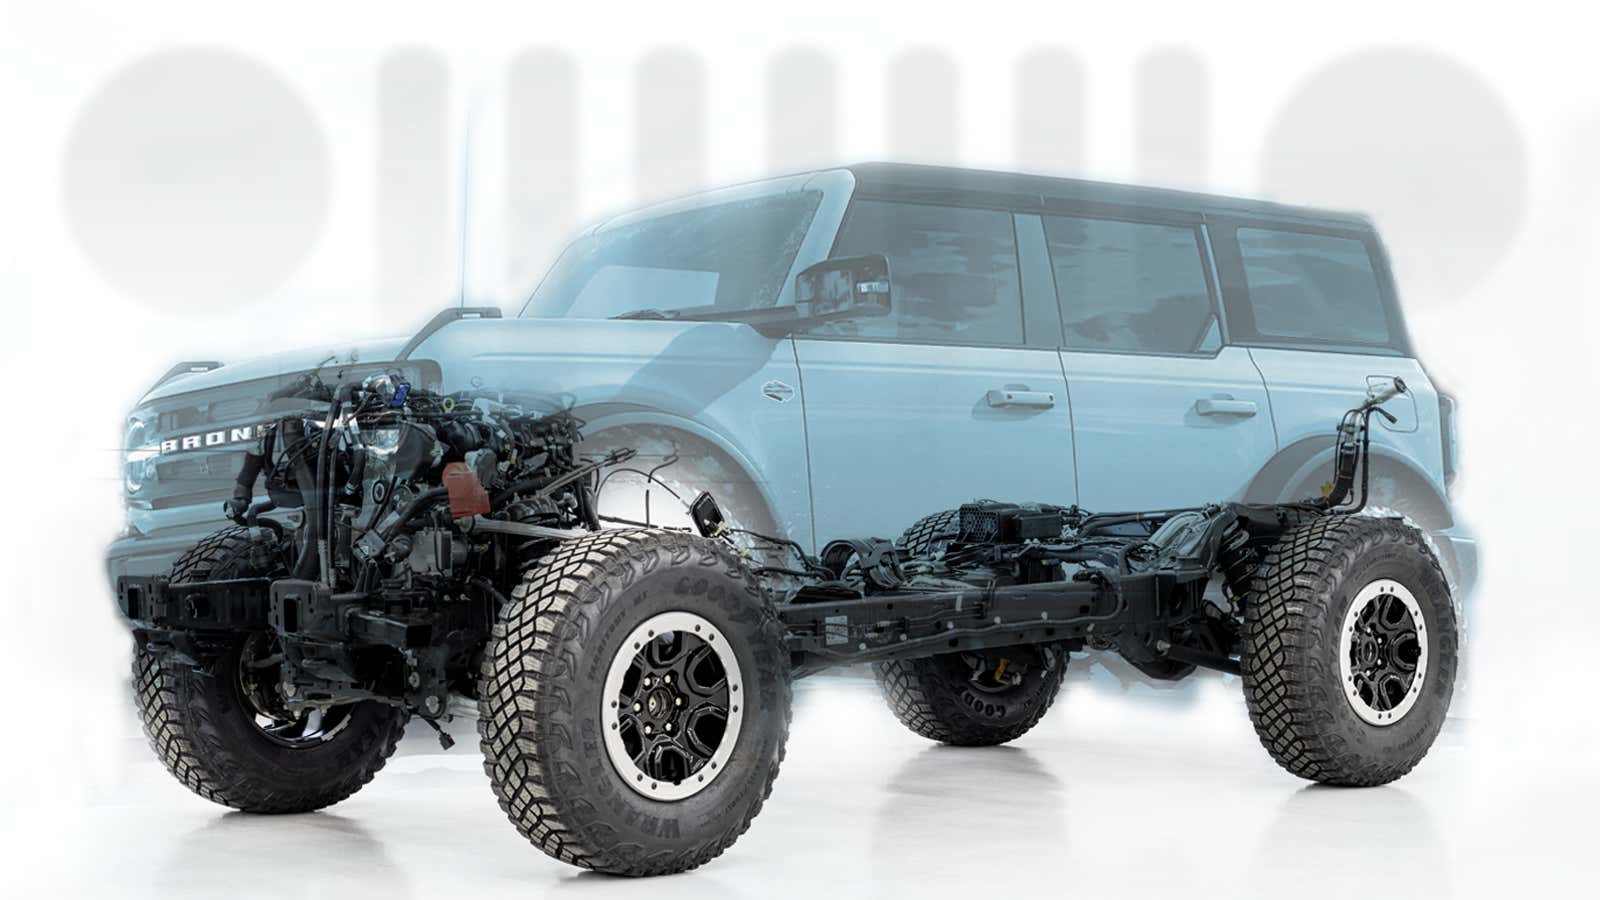 An Extremely Detailed Look Into The Ford Bronco's Engineering Designed To Take On Jeep